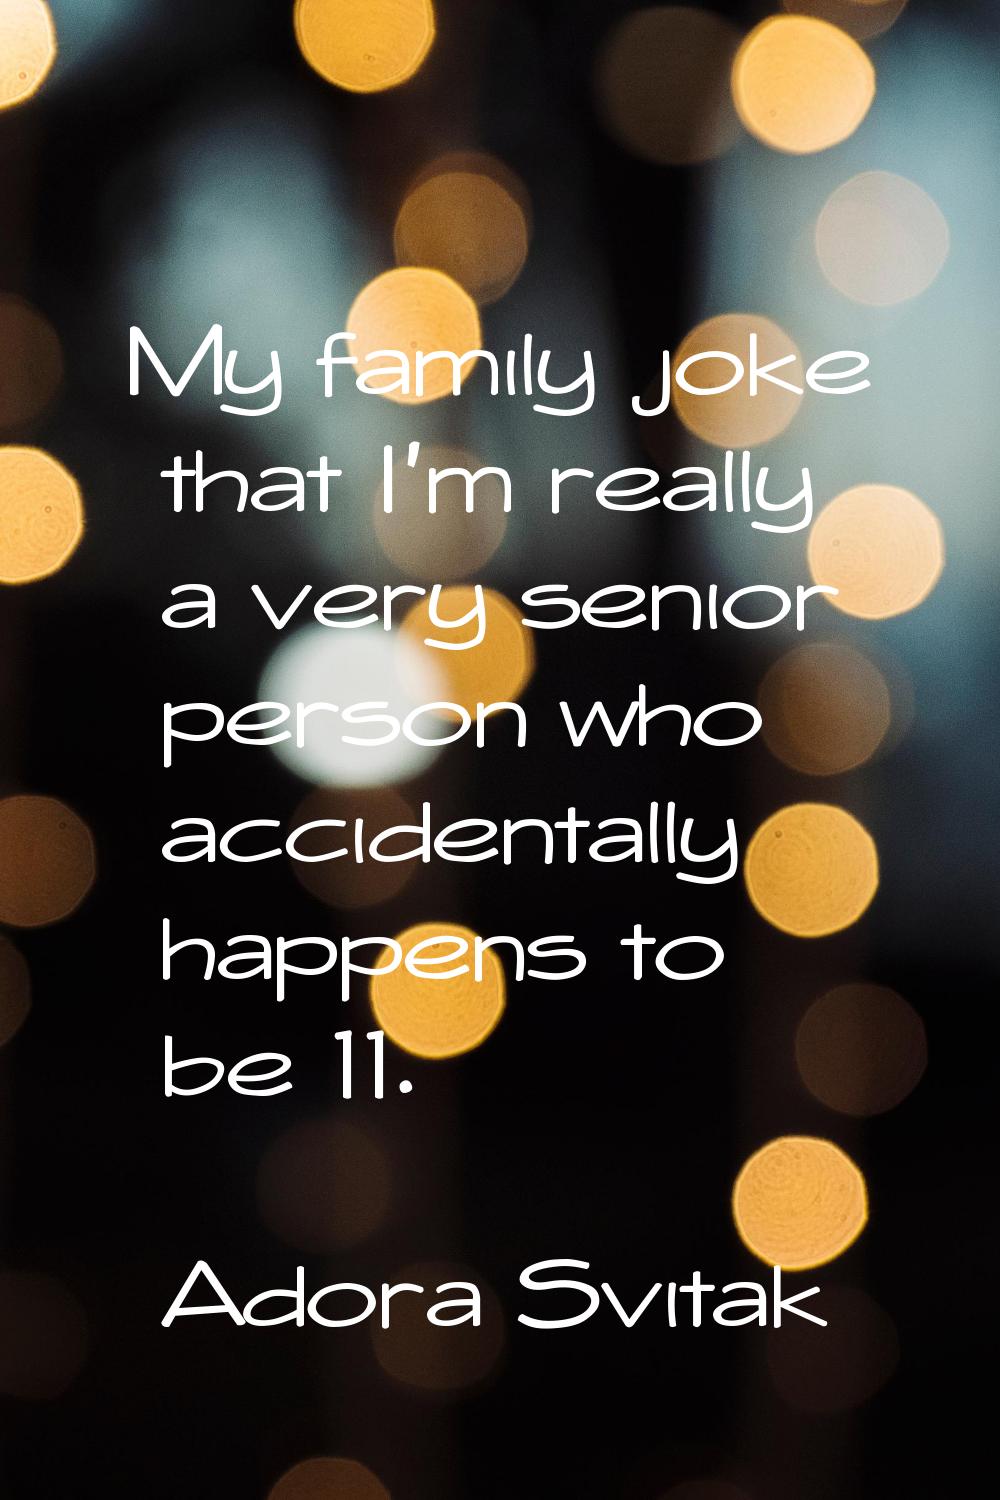 My family joke that I'm really a very senior person who accidentally happens to be 11.